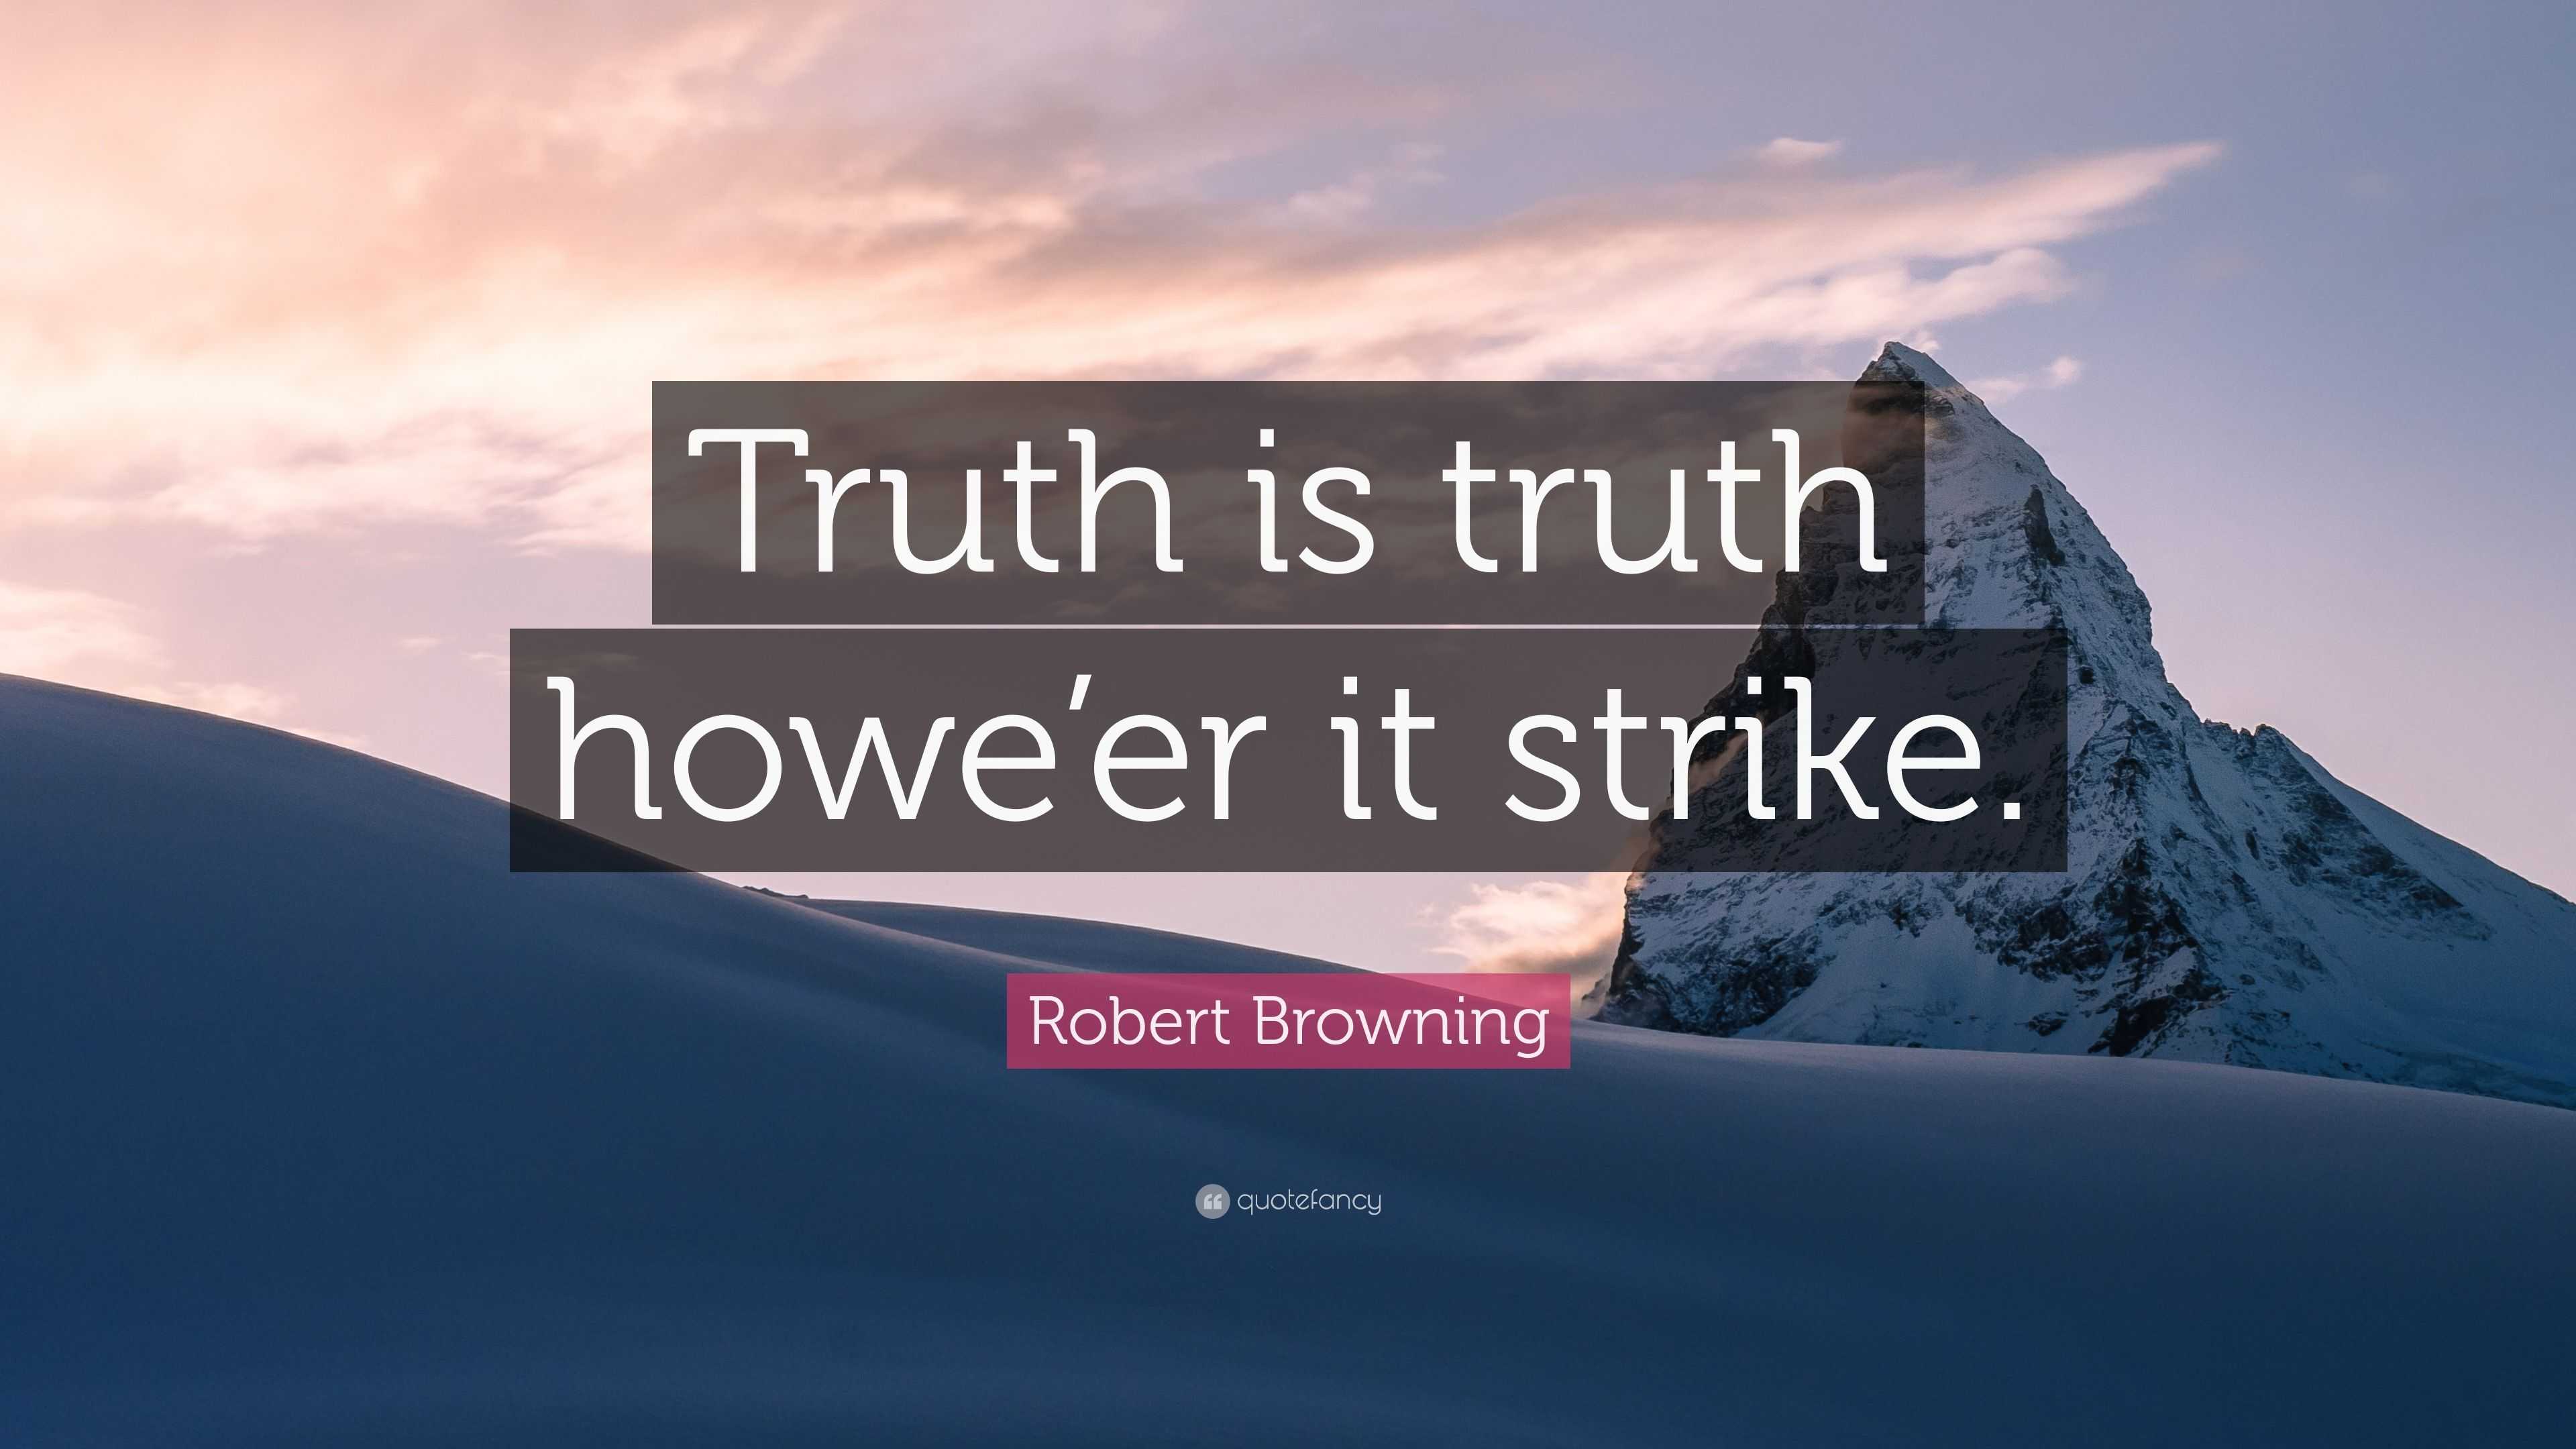 Robert Browning Quote “truth Is Truth Howe Er It Strike ”